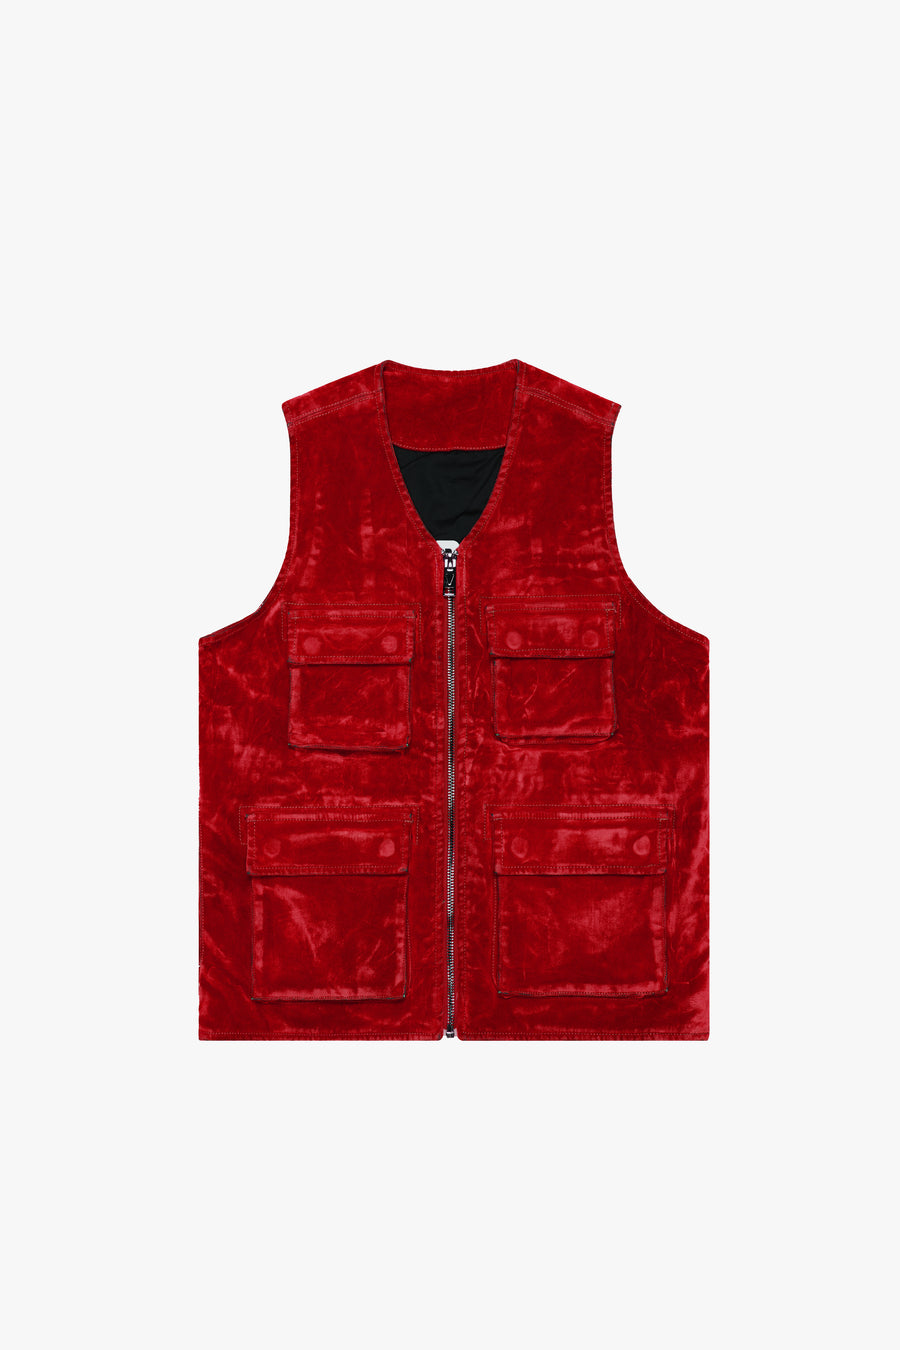 "CHARTREUSE" RED SUEDE VEST